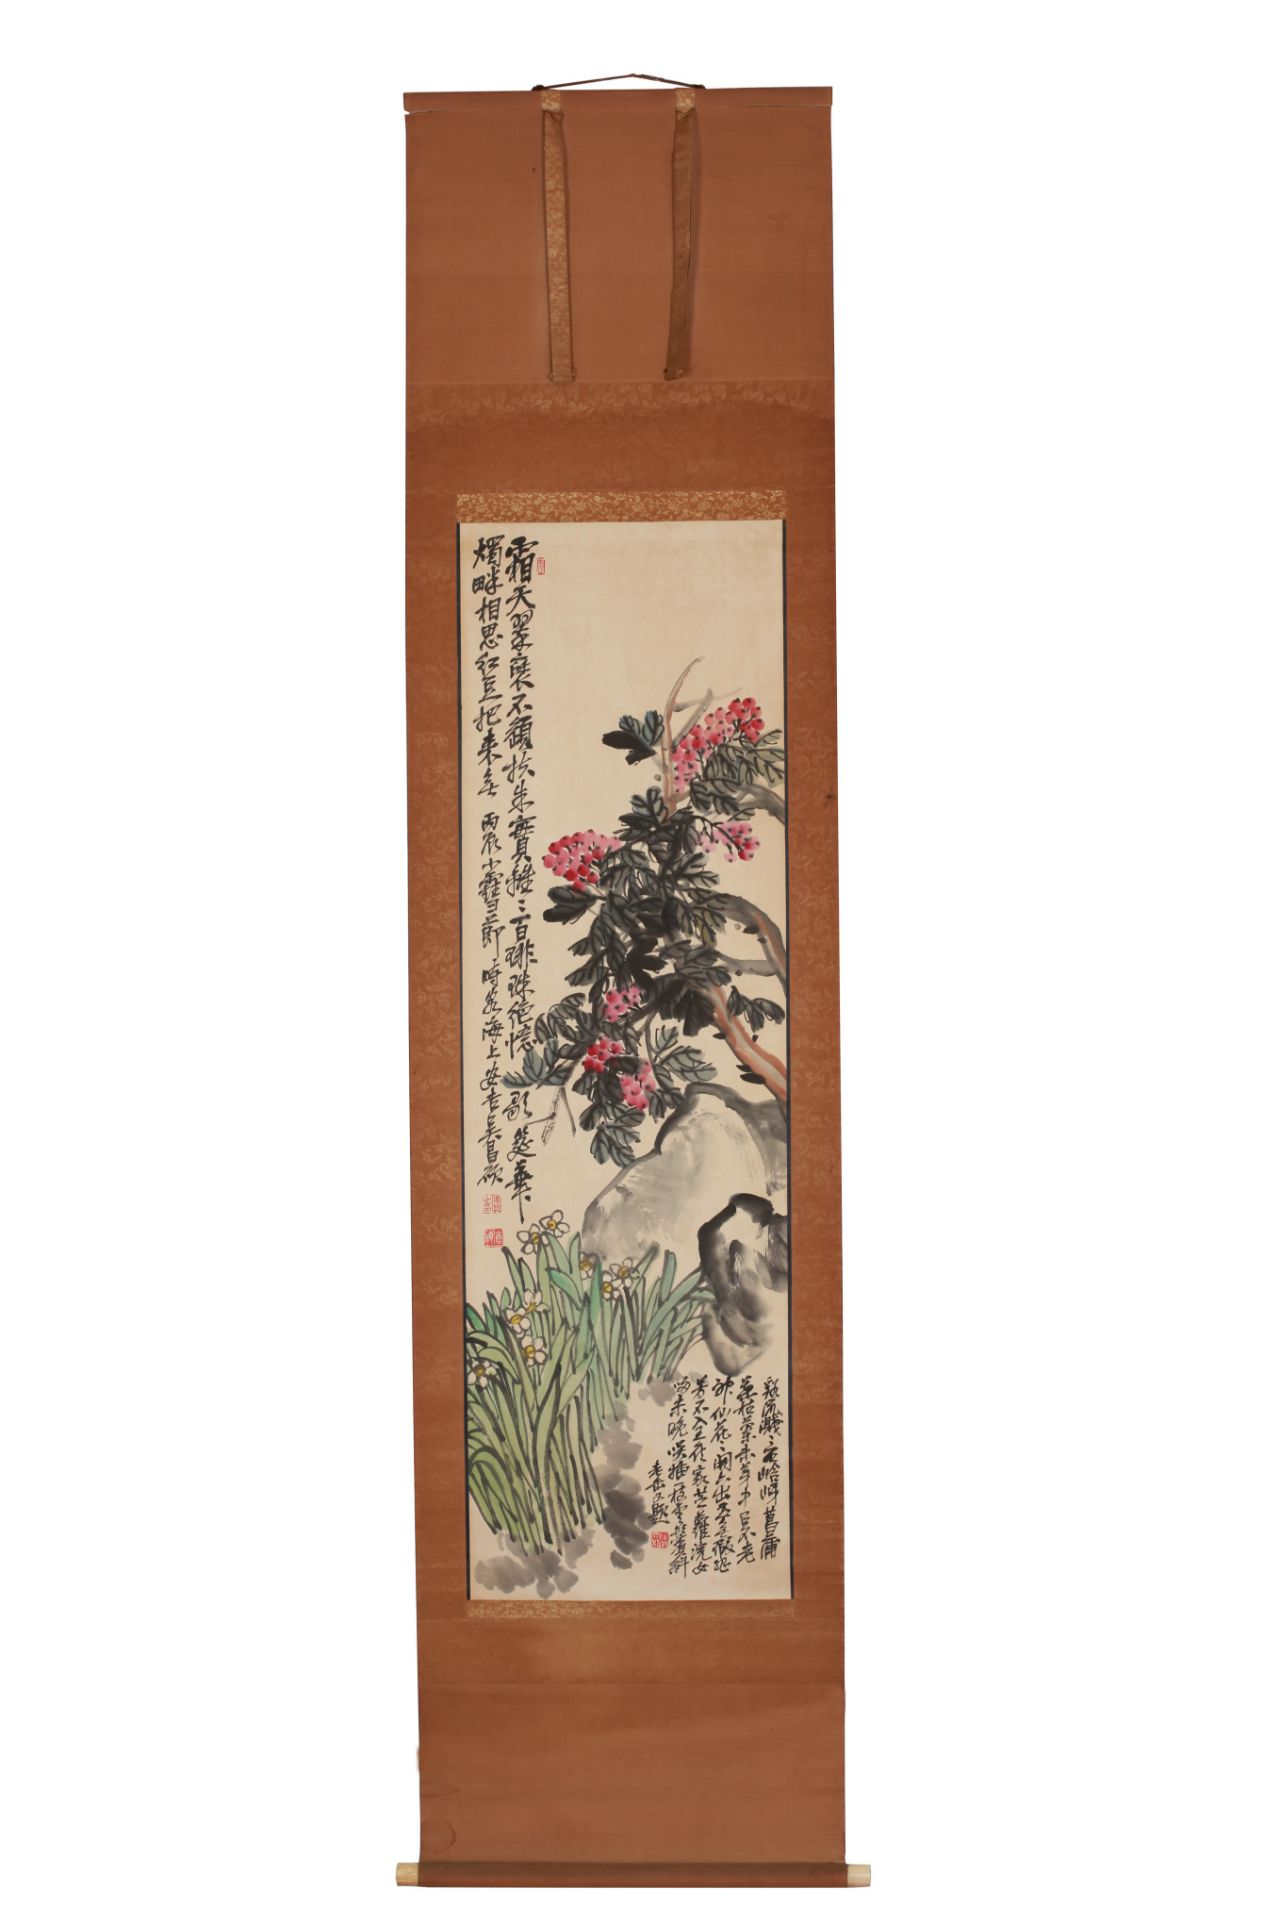 A Chinese Scroll Painting By Wu Changshuo - Image 3 of 10